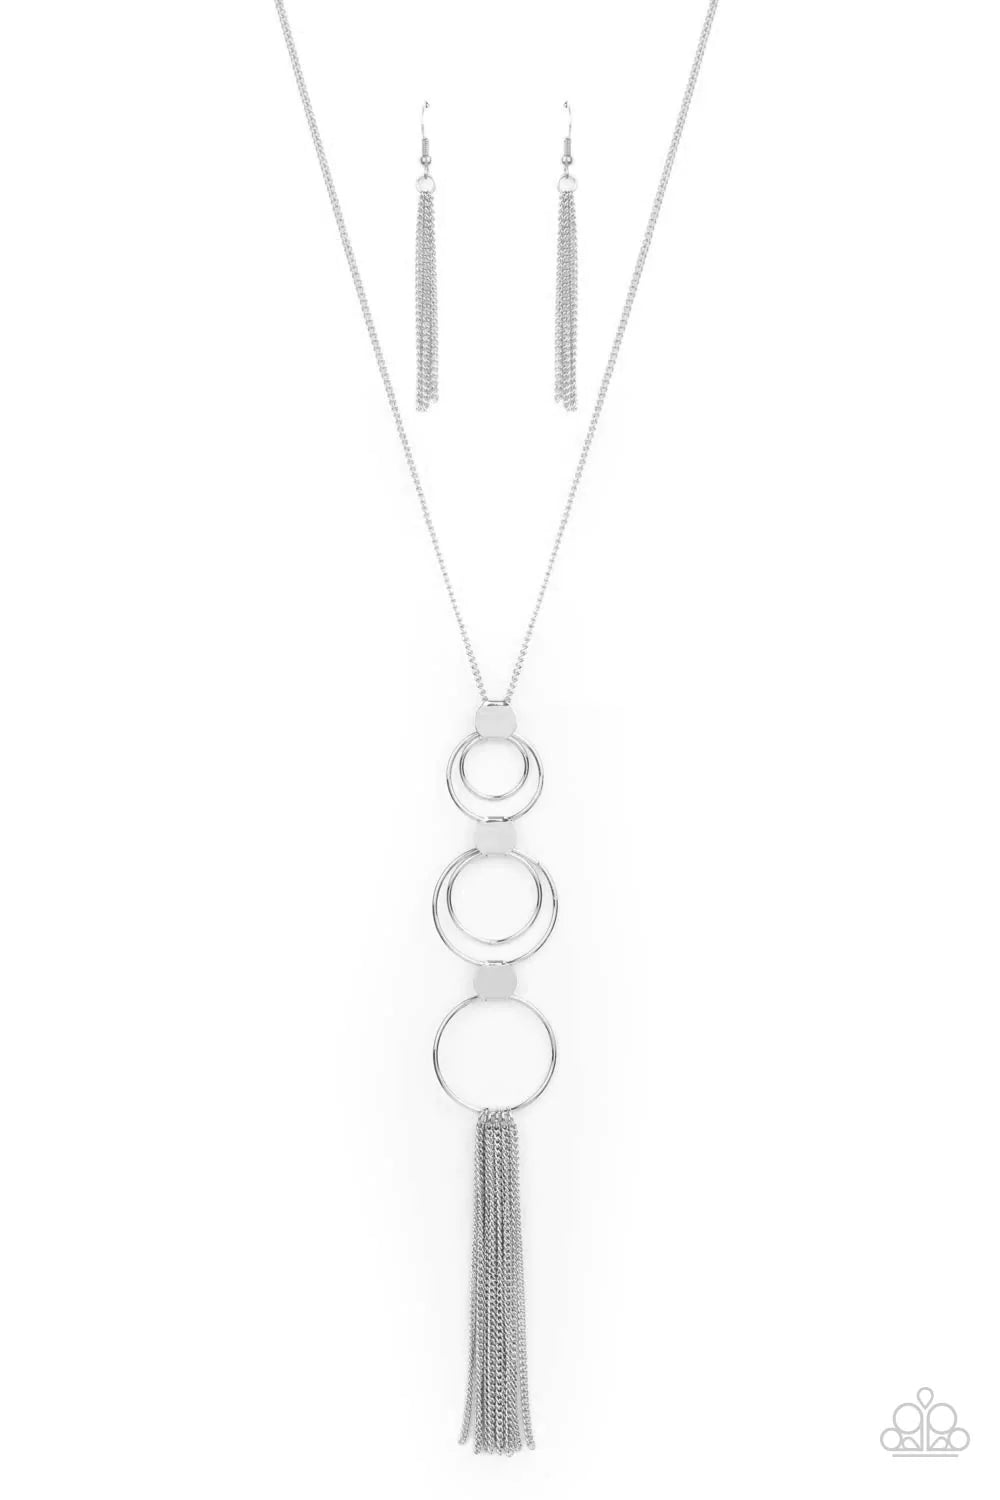 Join The Circle - Silver Necklace